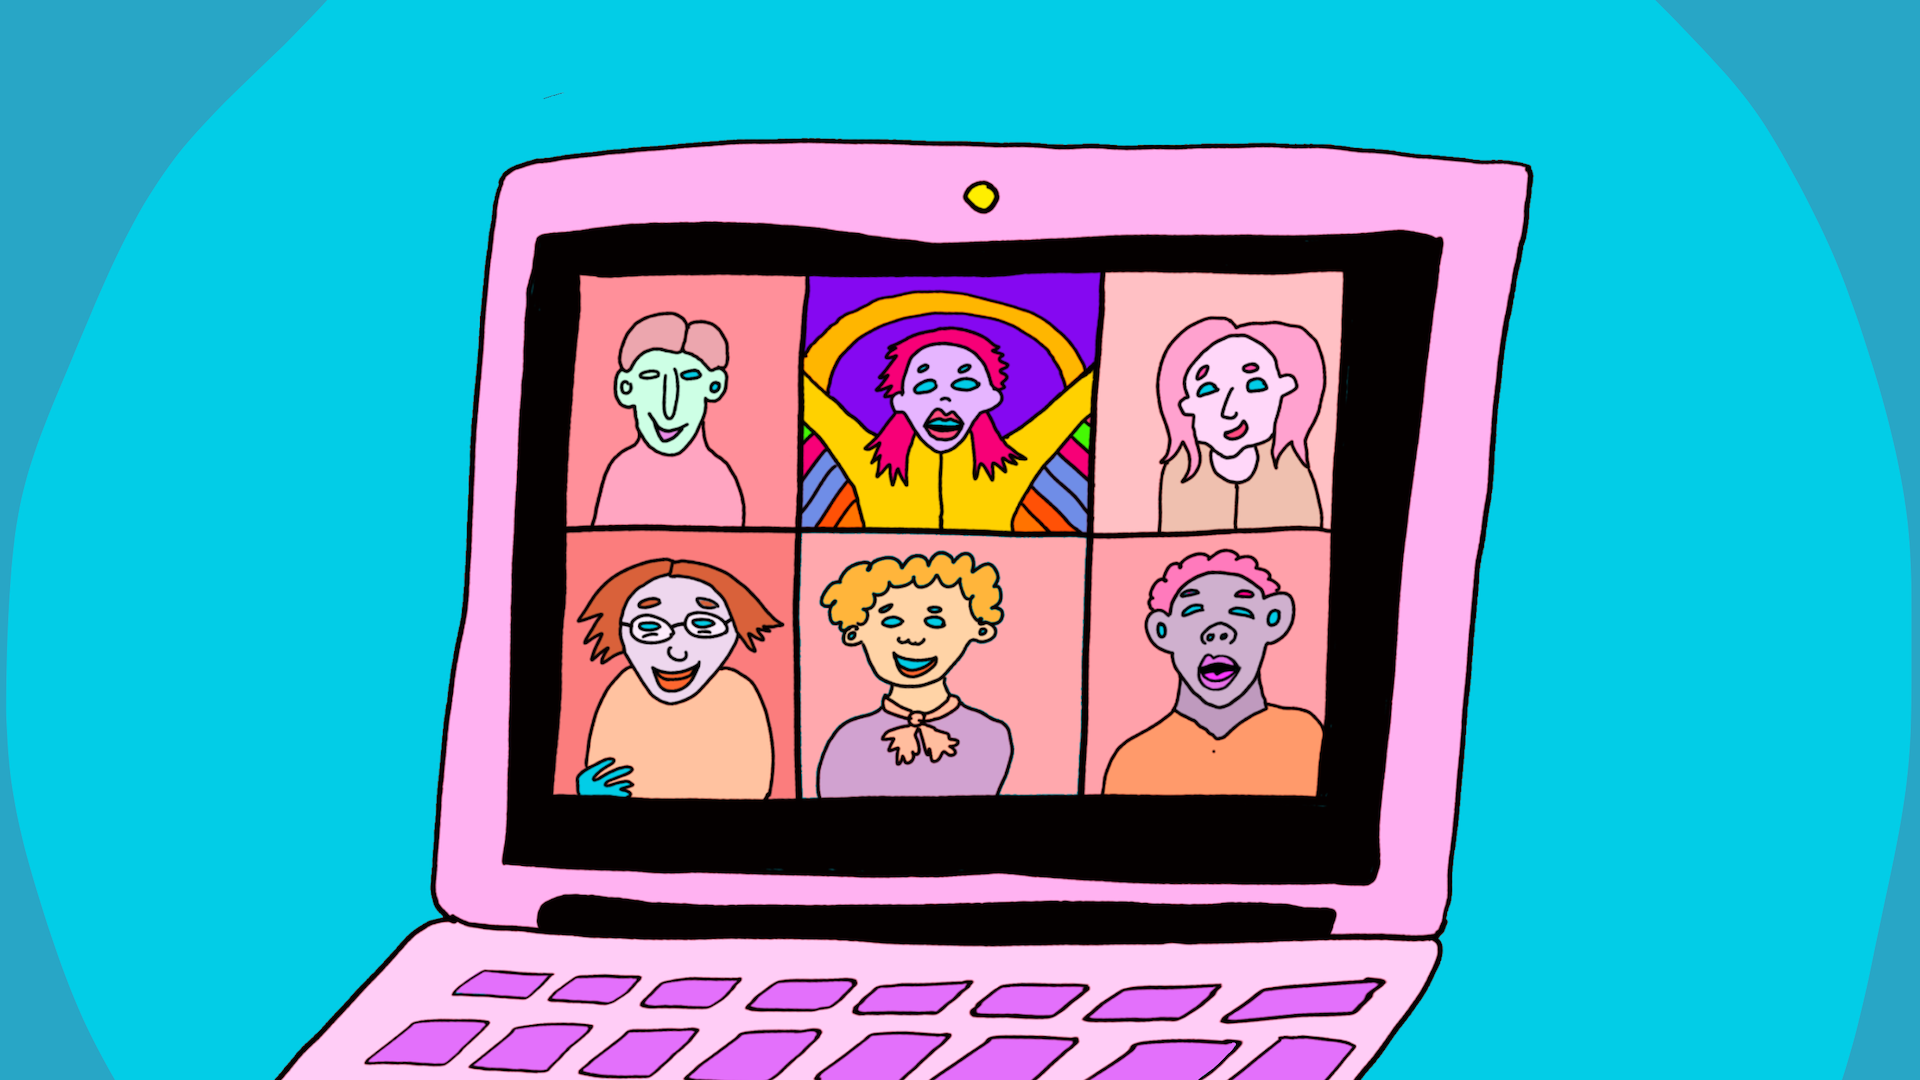 Illustration of a pink laptop on a blue background open to a Zoom call with animated people.